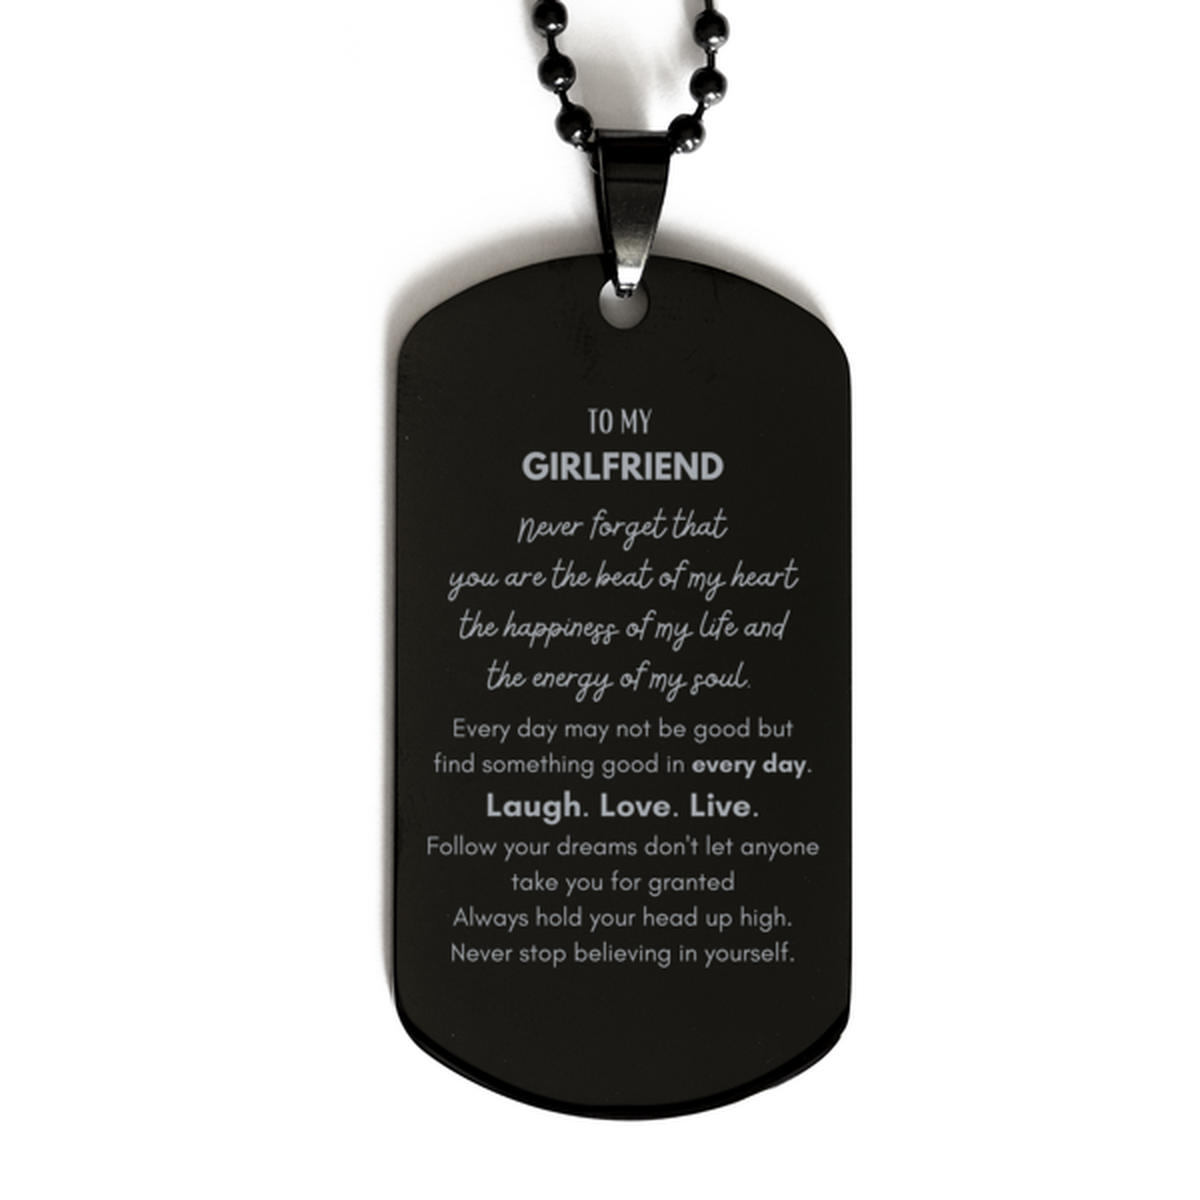 To My Girlfriend Dogtag Gifts, Christmas Girlfriend Black Dog Tag Present, Birthday Unique Motivational For Girlfriend, To My Girlfriend Never forget that you are the beat of my heart the happiness of my life and the energy of my soul